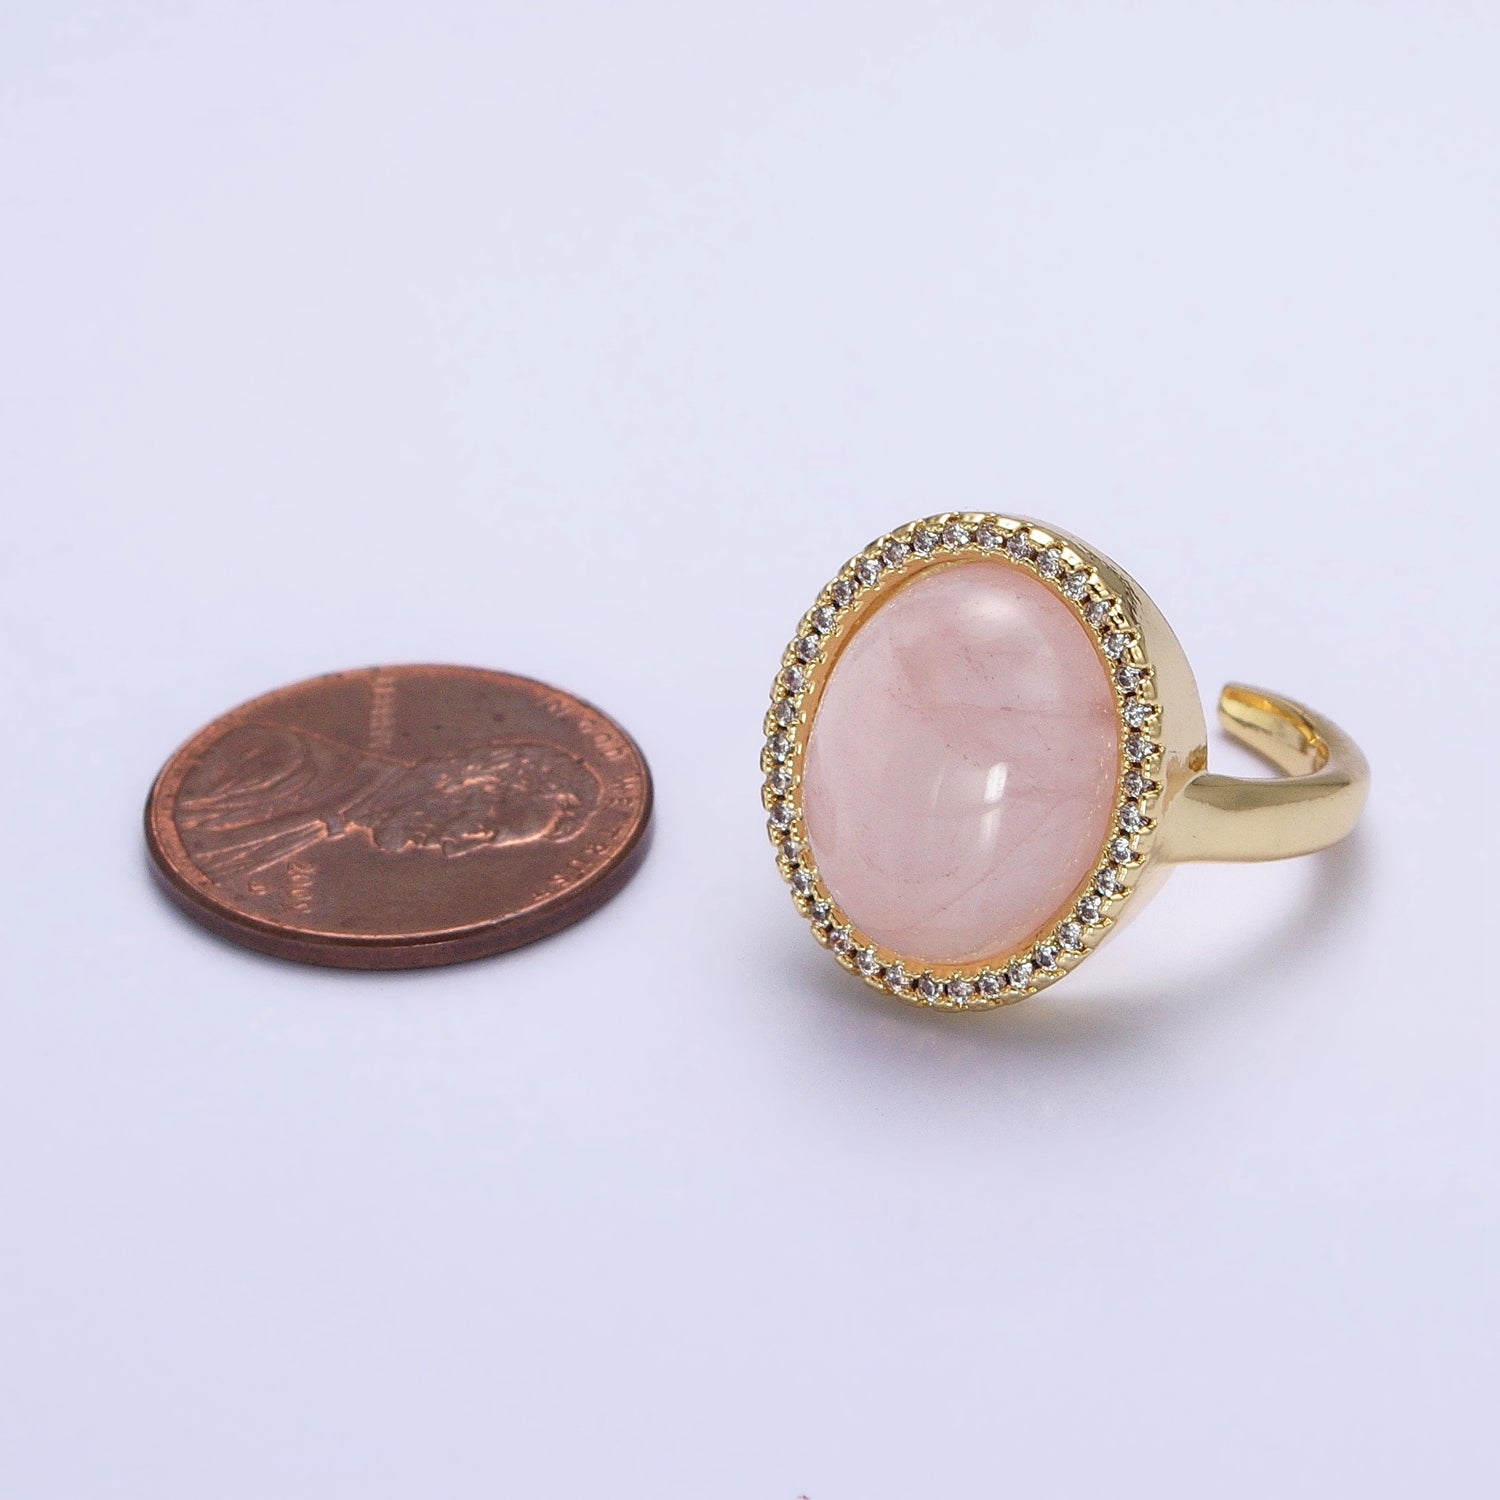 Micro Pave Healing Crystal Ring Rose Quartz Stone Ring in 24k Gold Filled Adjustable Ring AA1356 - DLUXCA